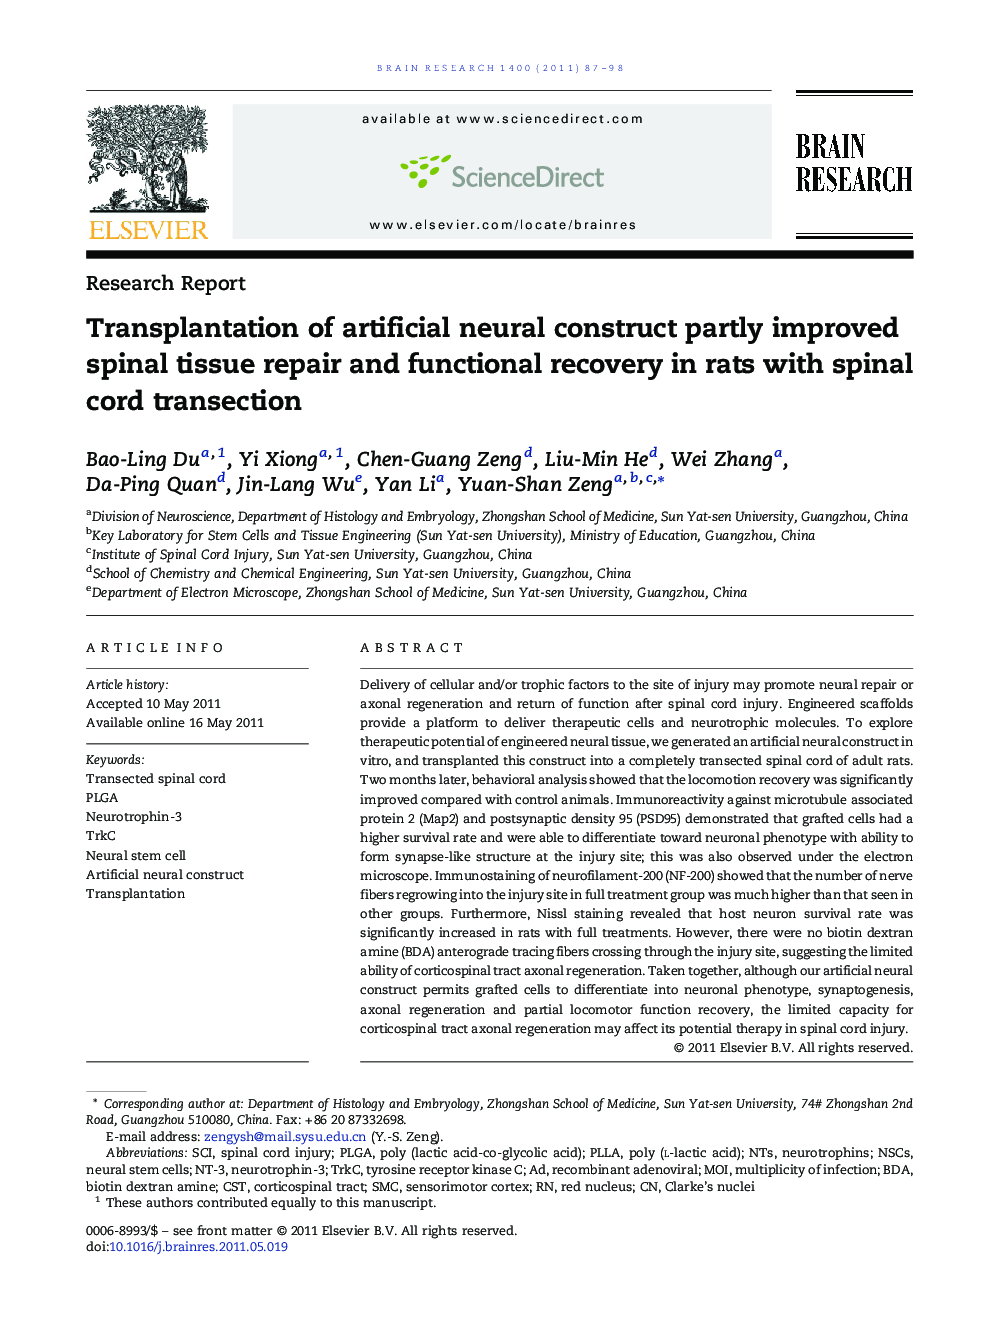 Transplantation of artificial neural construct partly improved spinal tissue repair and functional recovery in rats with spinal cord transection